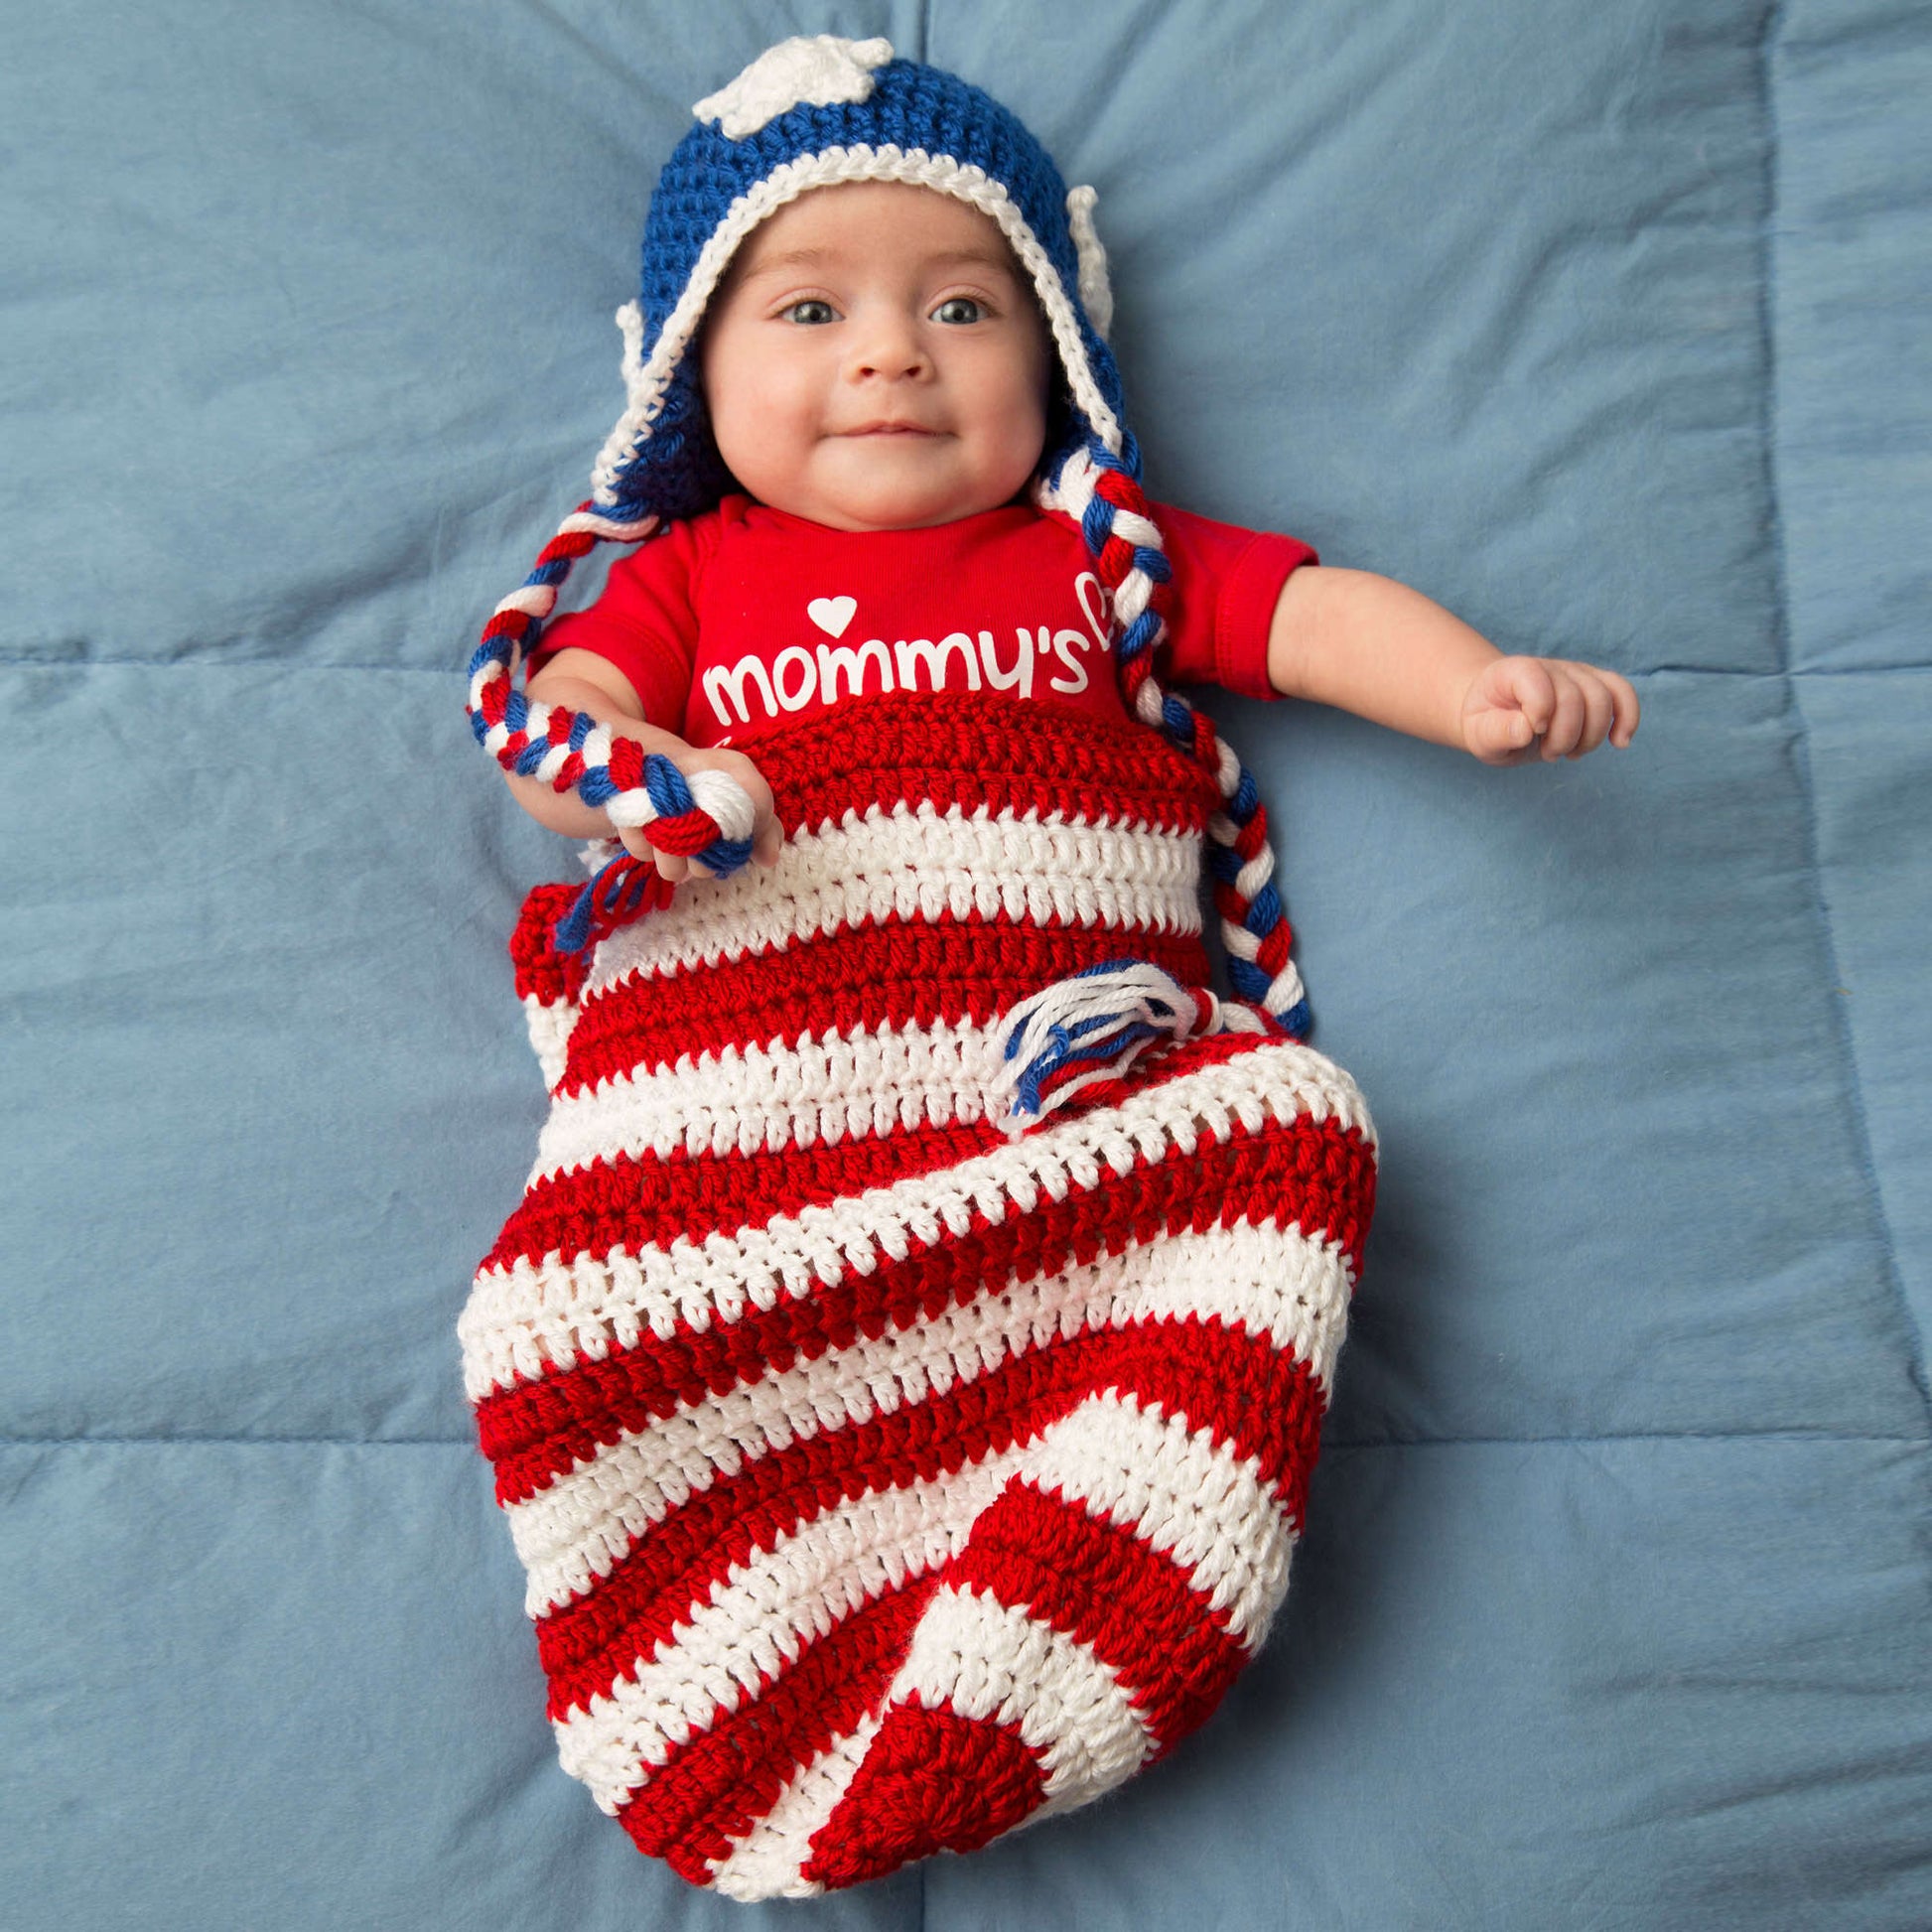 Free Red Heart Crochet Patriotic Baby Cocoon & Hat Pattern